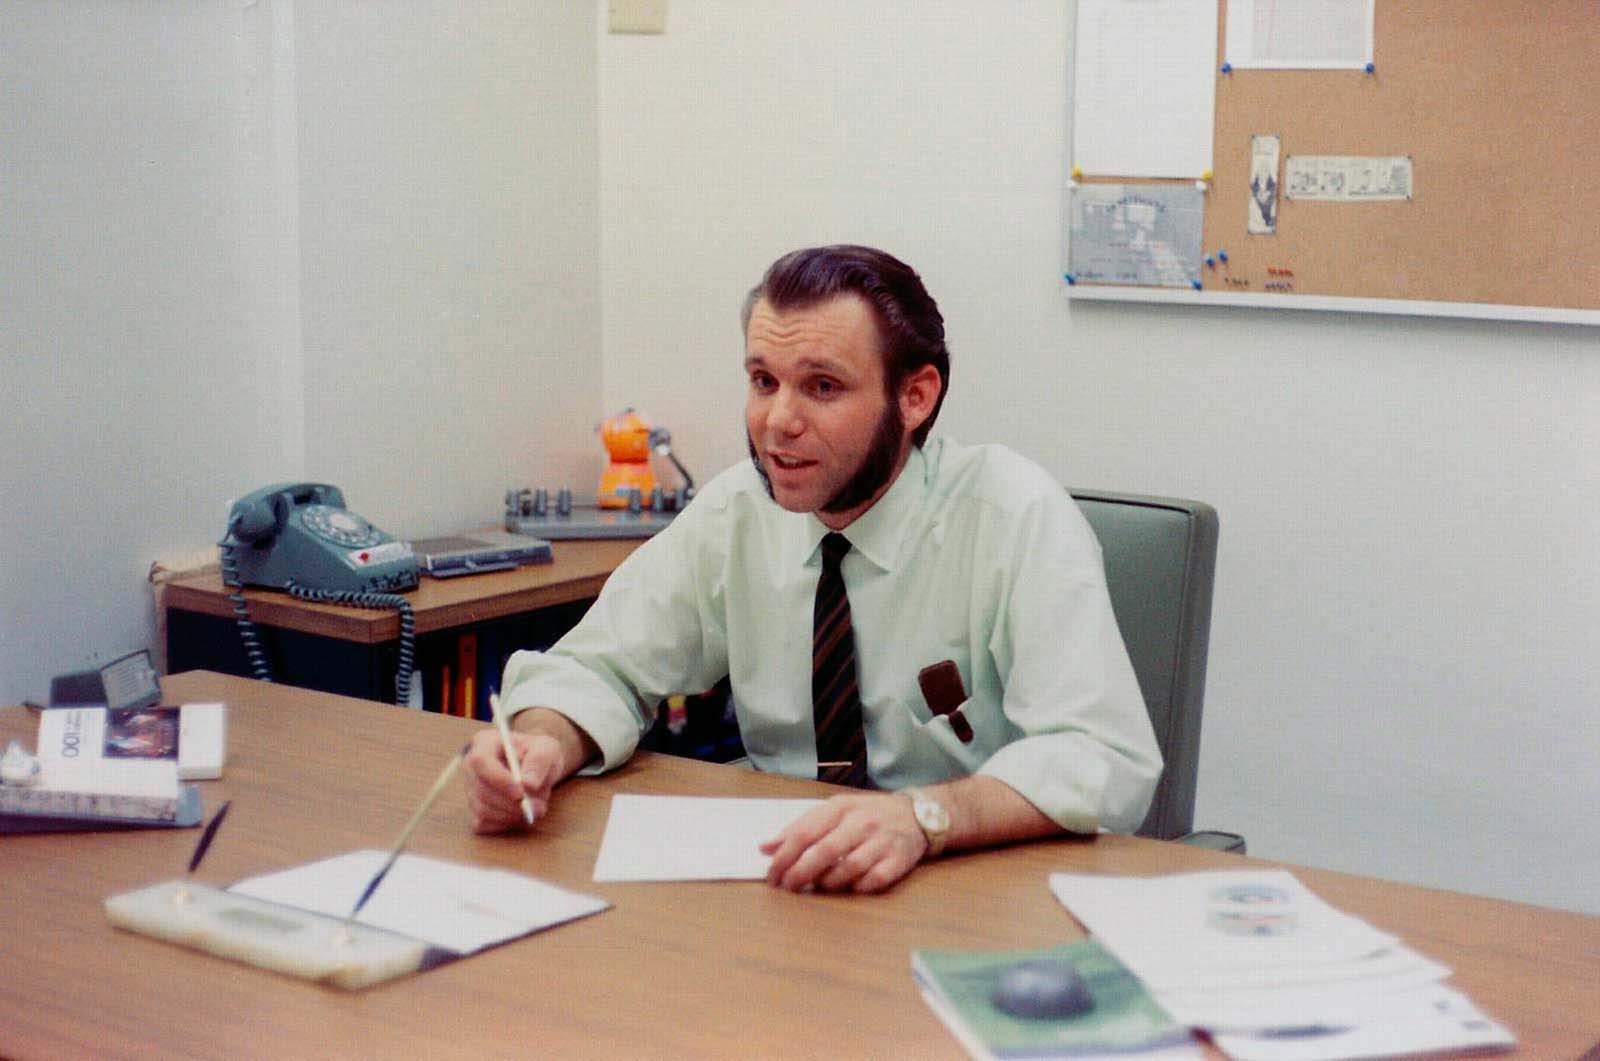 Larry Luckham. Operator Manager. Check out the slide rule in the pocket and the sideburns. Hey, it was the 1960's!